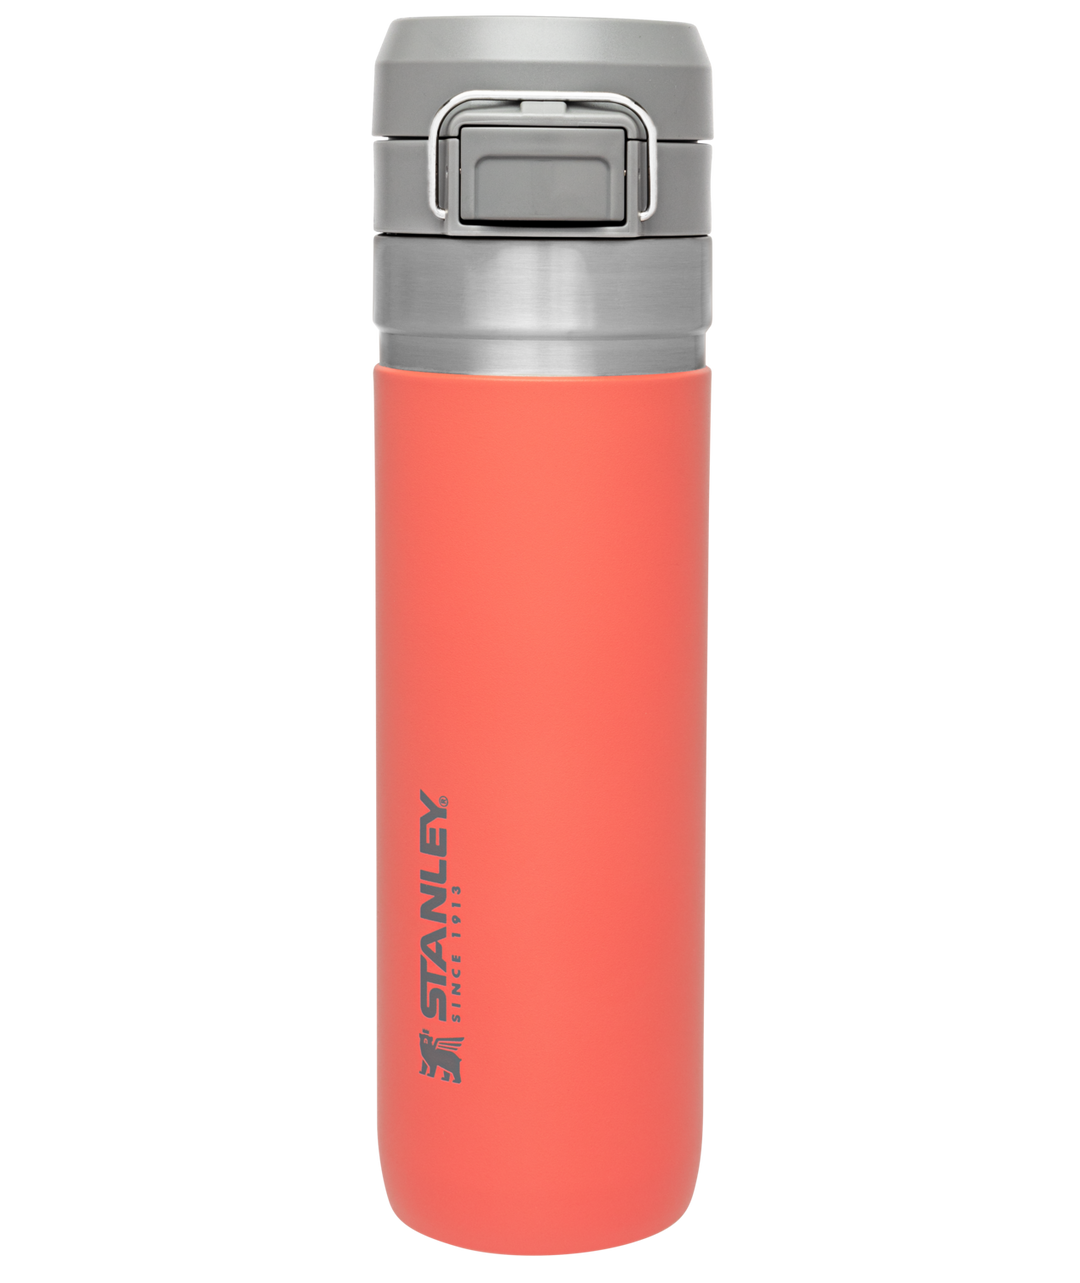  STANLEY Quick Flip Stainless Steel Water Bottle .71L / 24OZ  Polar – Leakproof Insulated Water Bottle - Push Button Locking Lid -  BPA-Free Thermos Flask - Cup Holder Compatible - Dishwasher